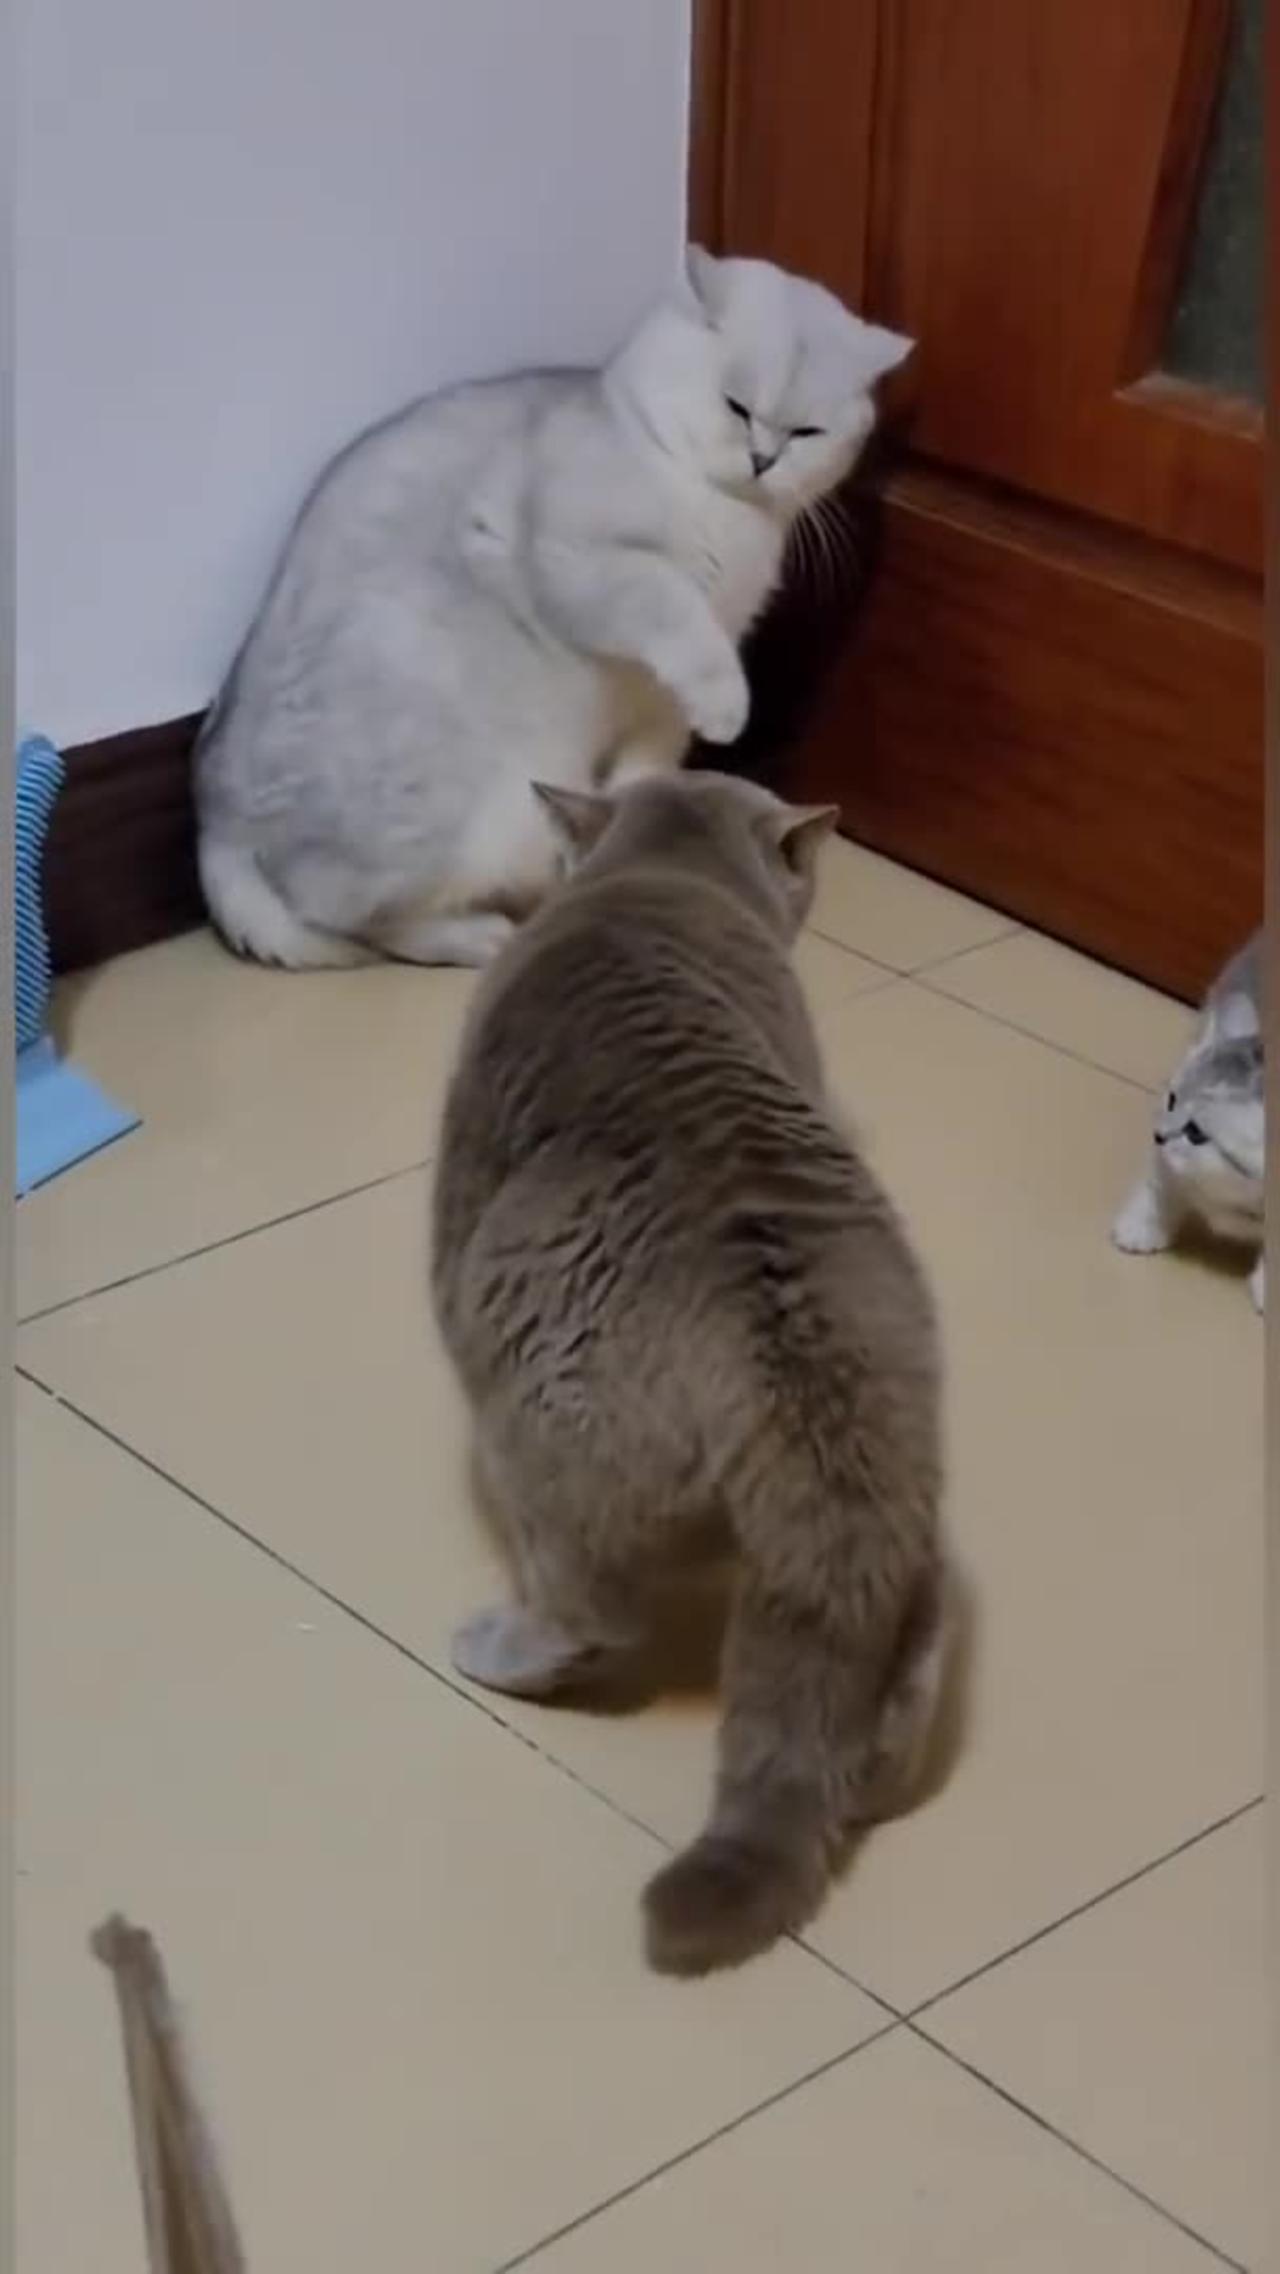 "How These Hilarious Cats Will Leave You Rolling on the Floor - A Funny Cat Rumble Compilation